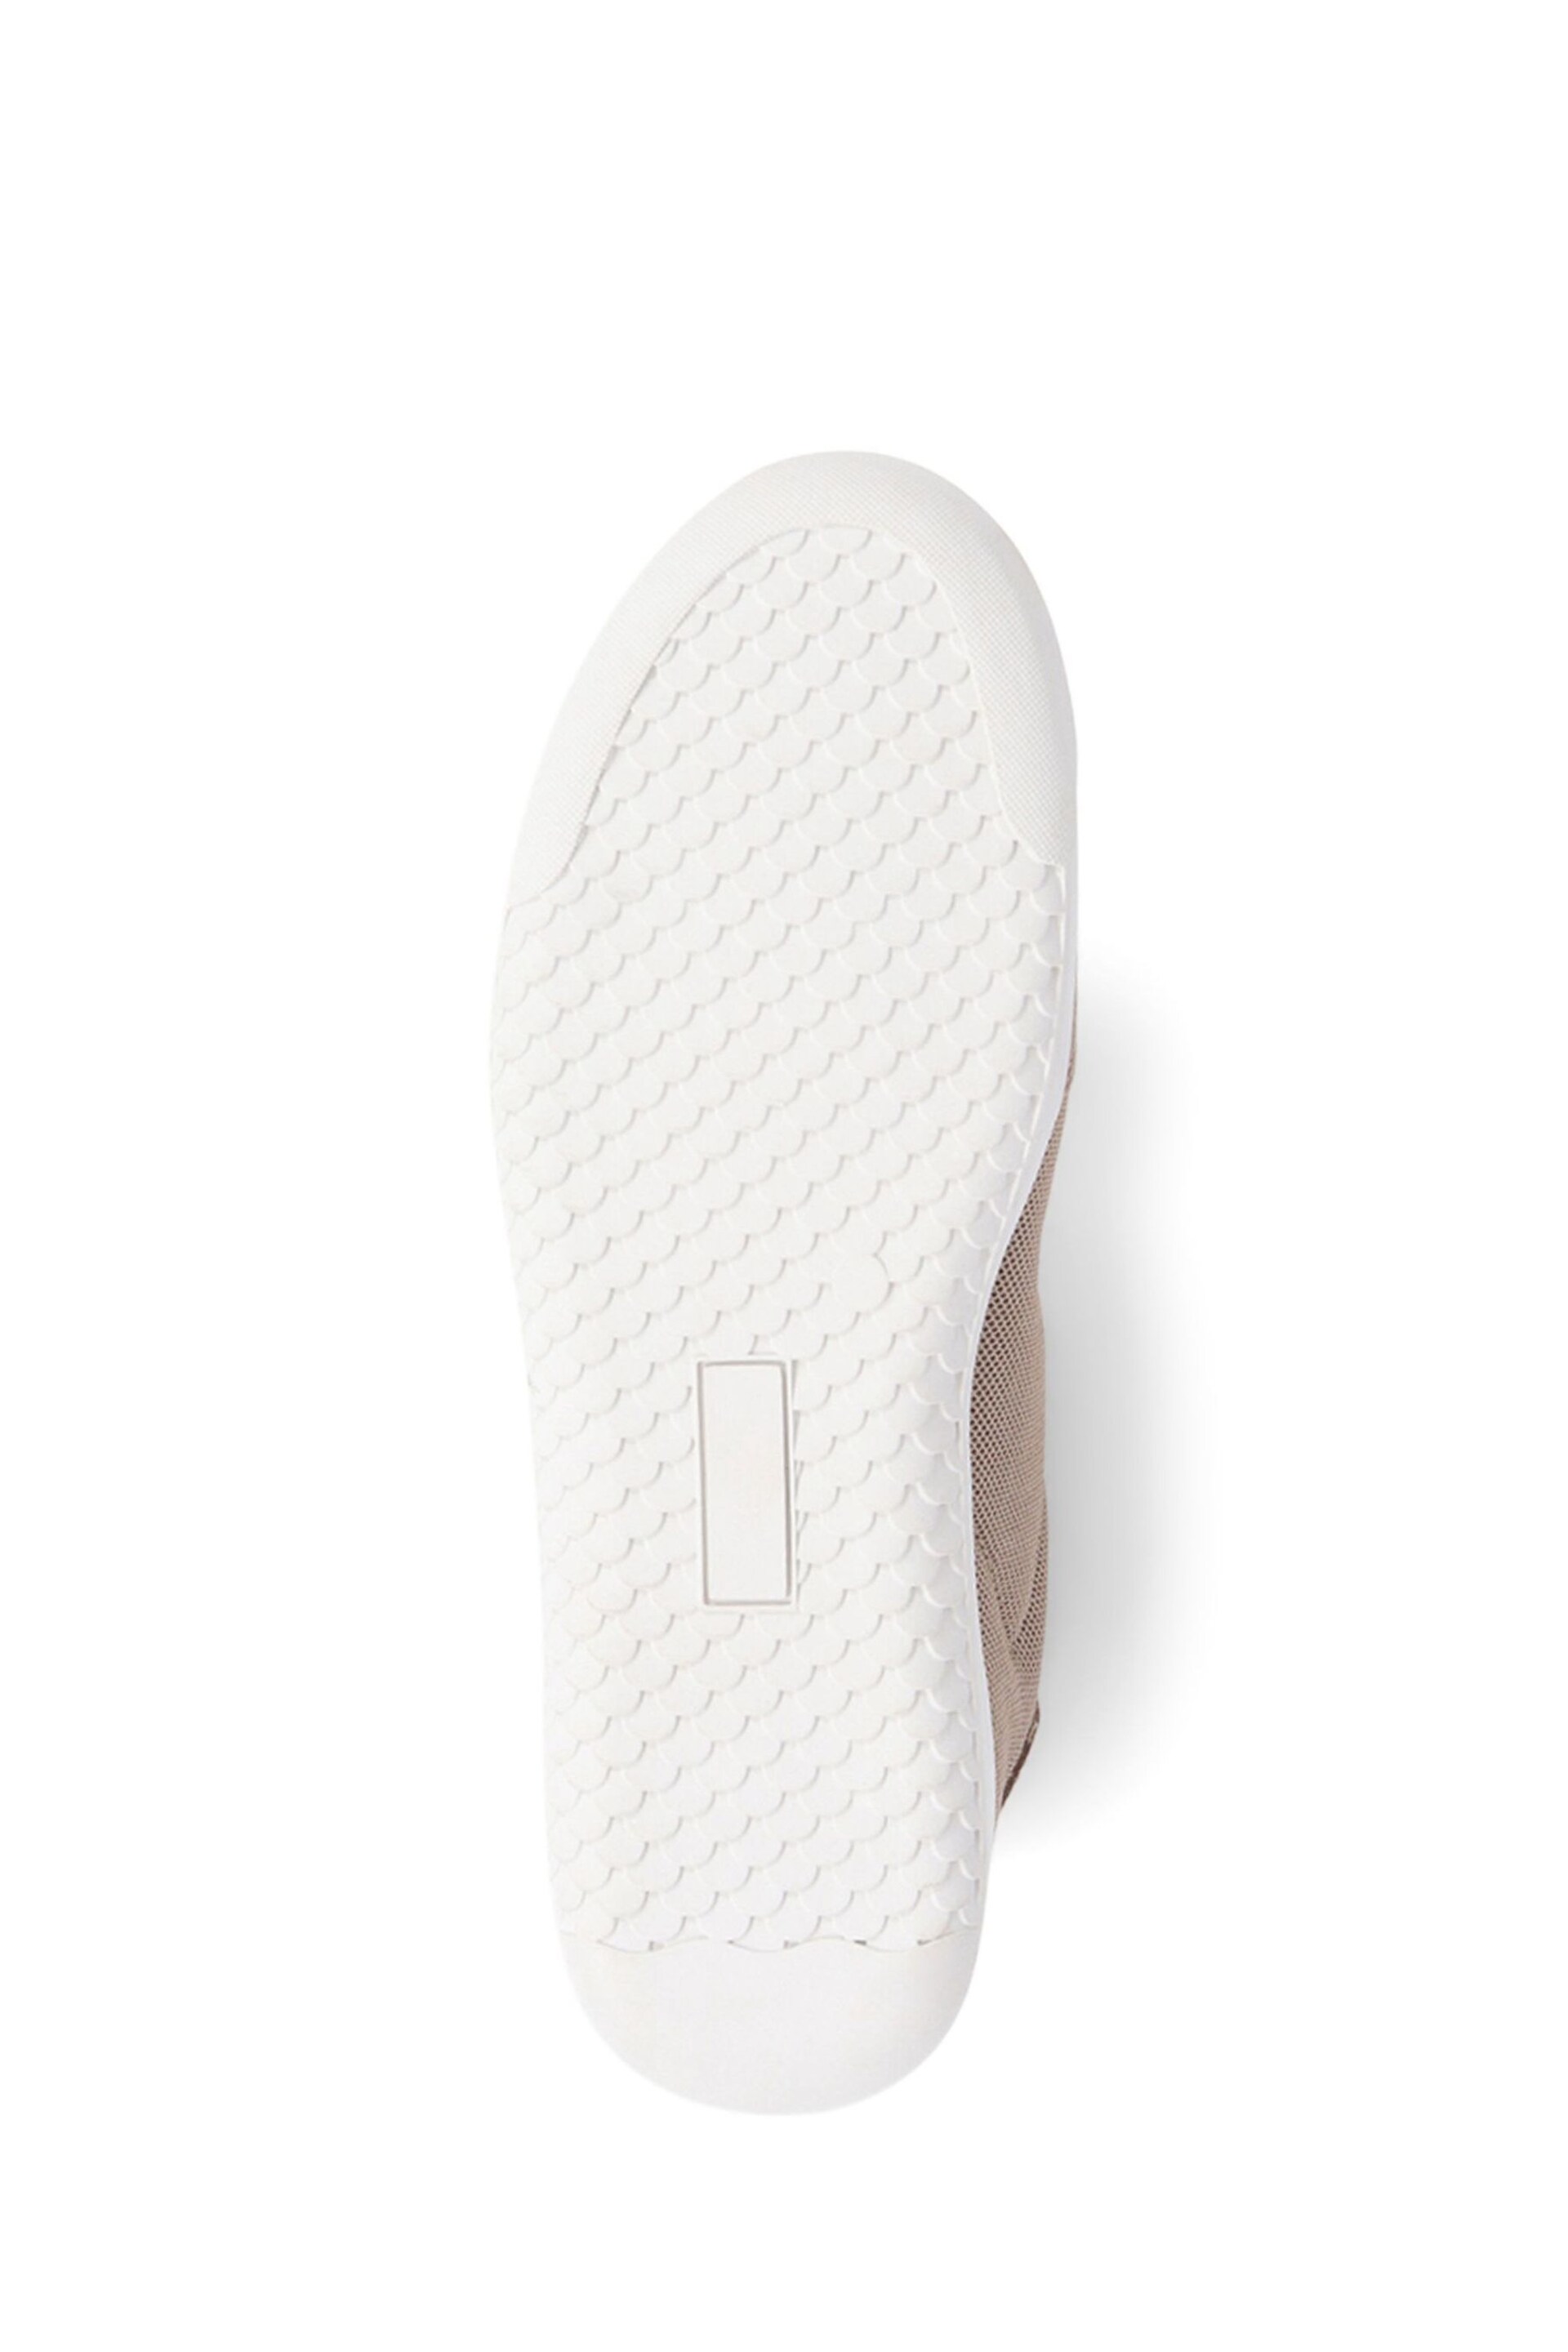 Pavers Natural Memory Foam Leather Trainers - Image 5 of 5